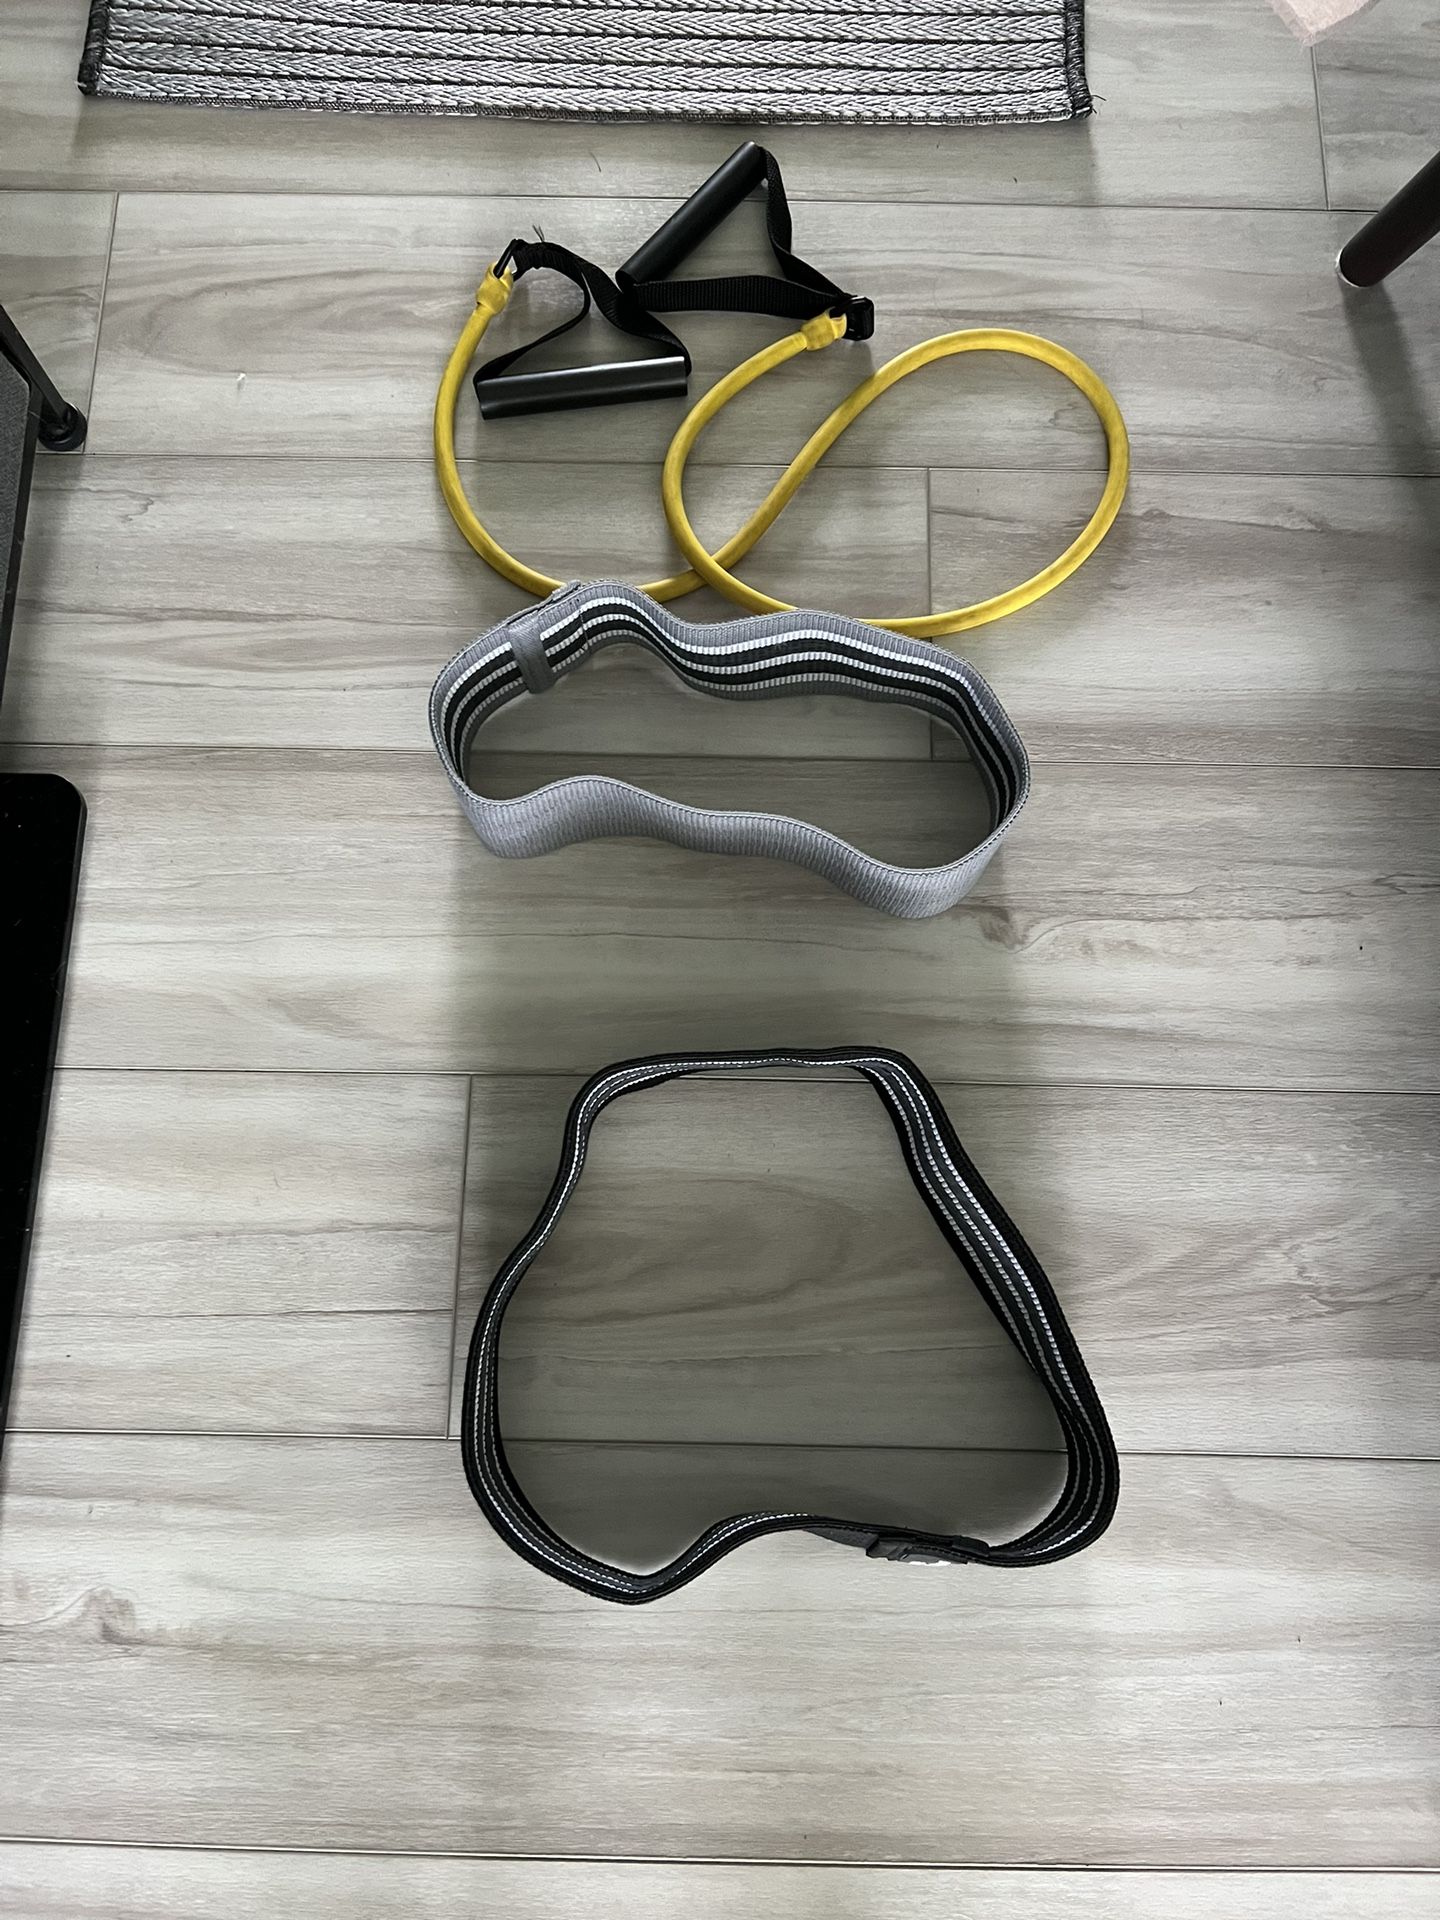 Fitness Exercise Resistance Bands 2 Hip + 1